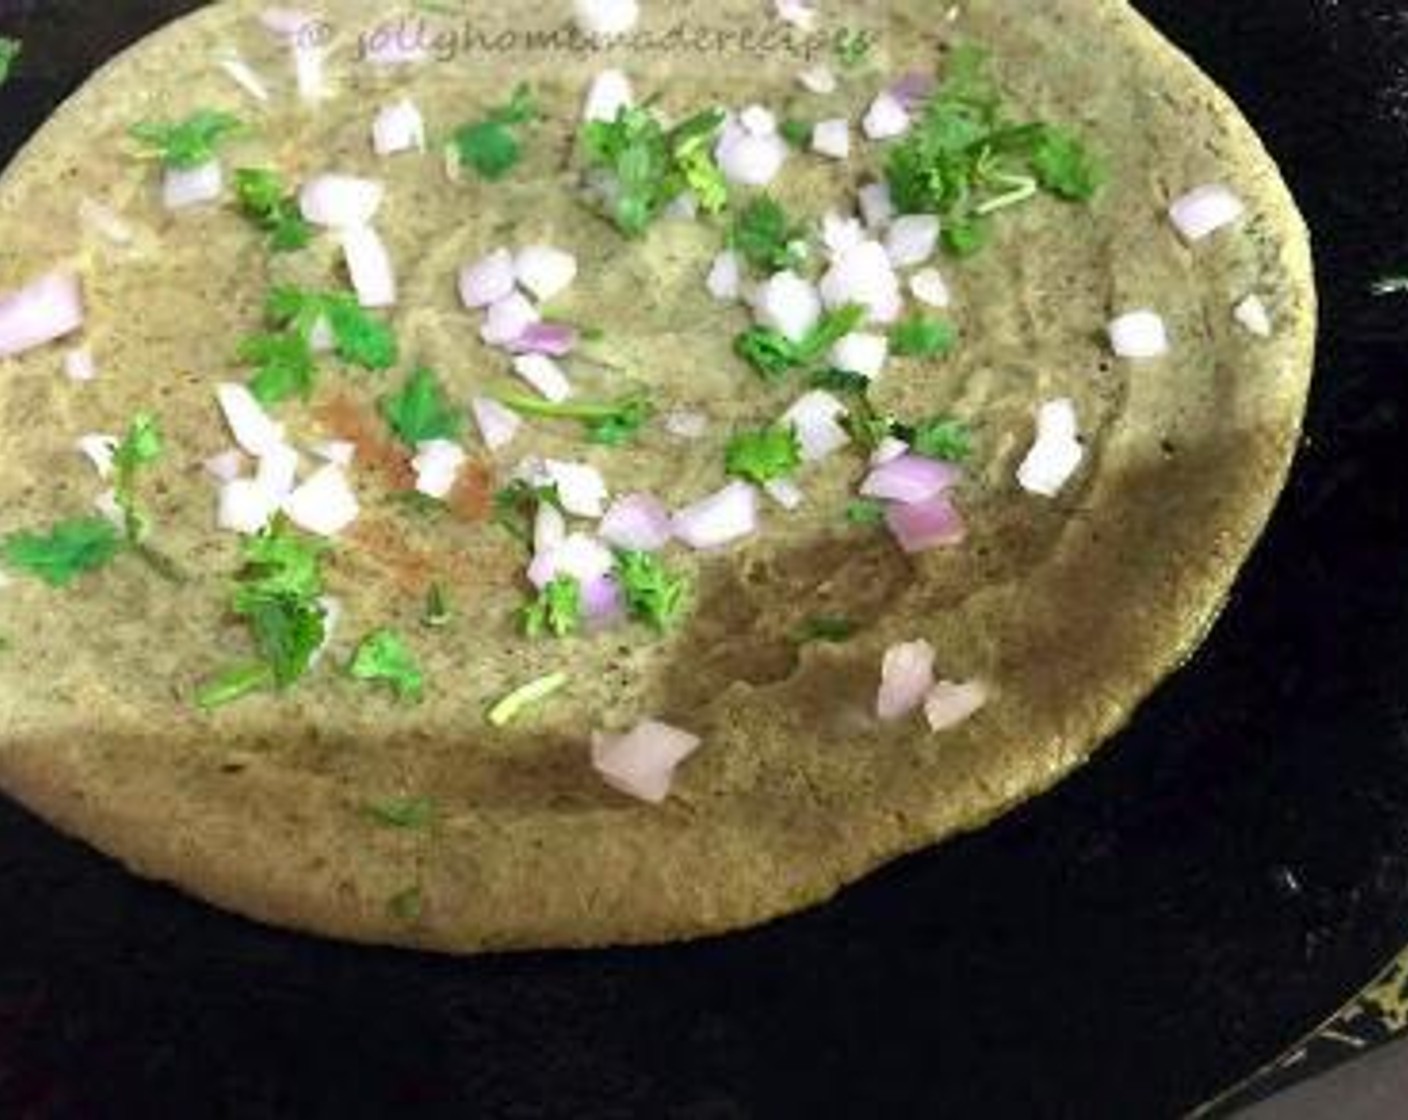 step 2 On a pan or griddle, add Oil (as needed). With a big ladle or spoon, pour the dosa batter and shape it into a round shape with the ladle. Cook the dosa on low-medium flame only. Now sprinkle some Onion (1 Tbsp) and Fresh Cilantro (1 Tbsp).